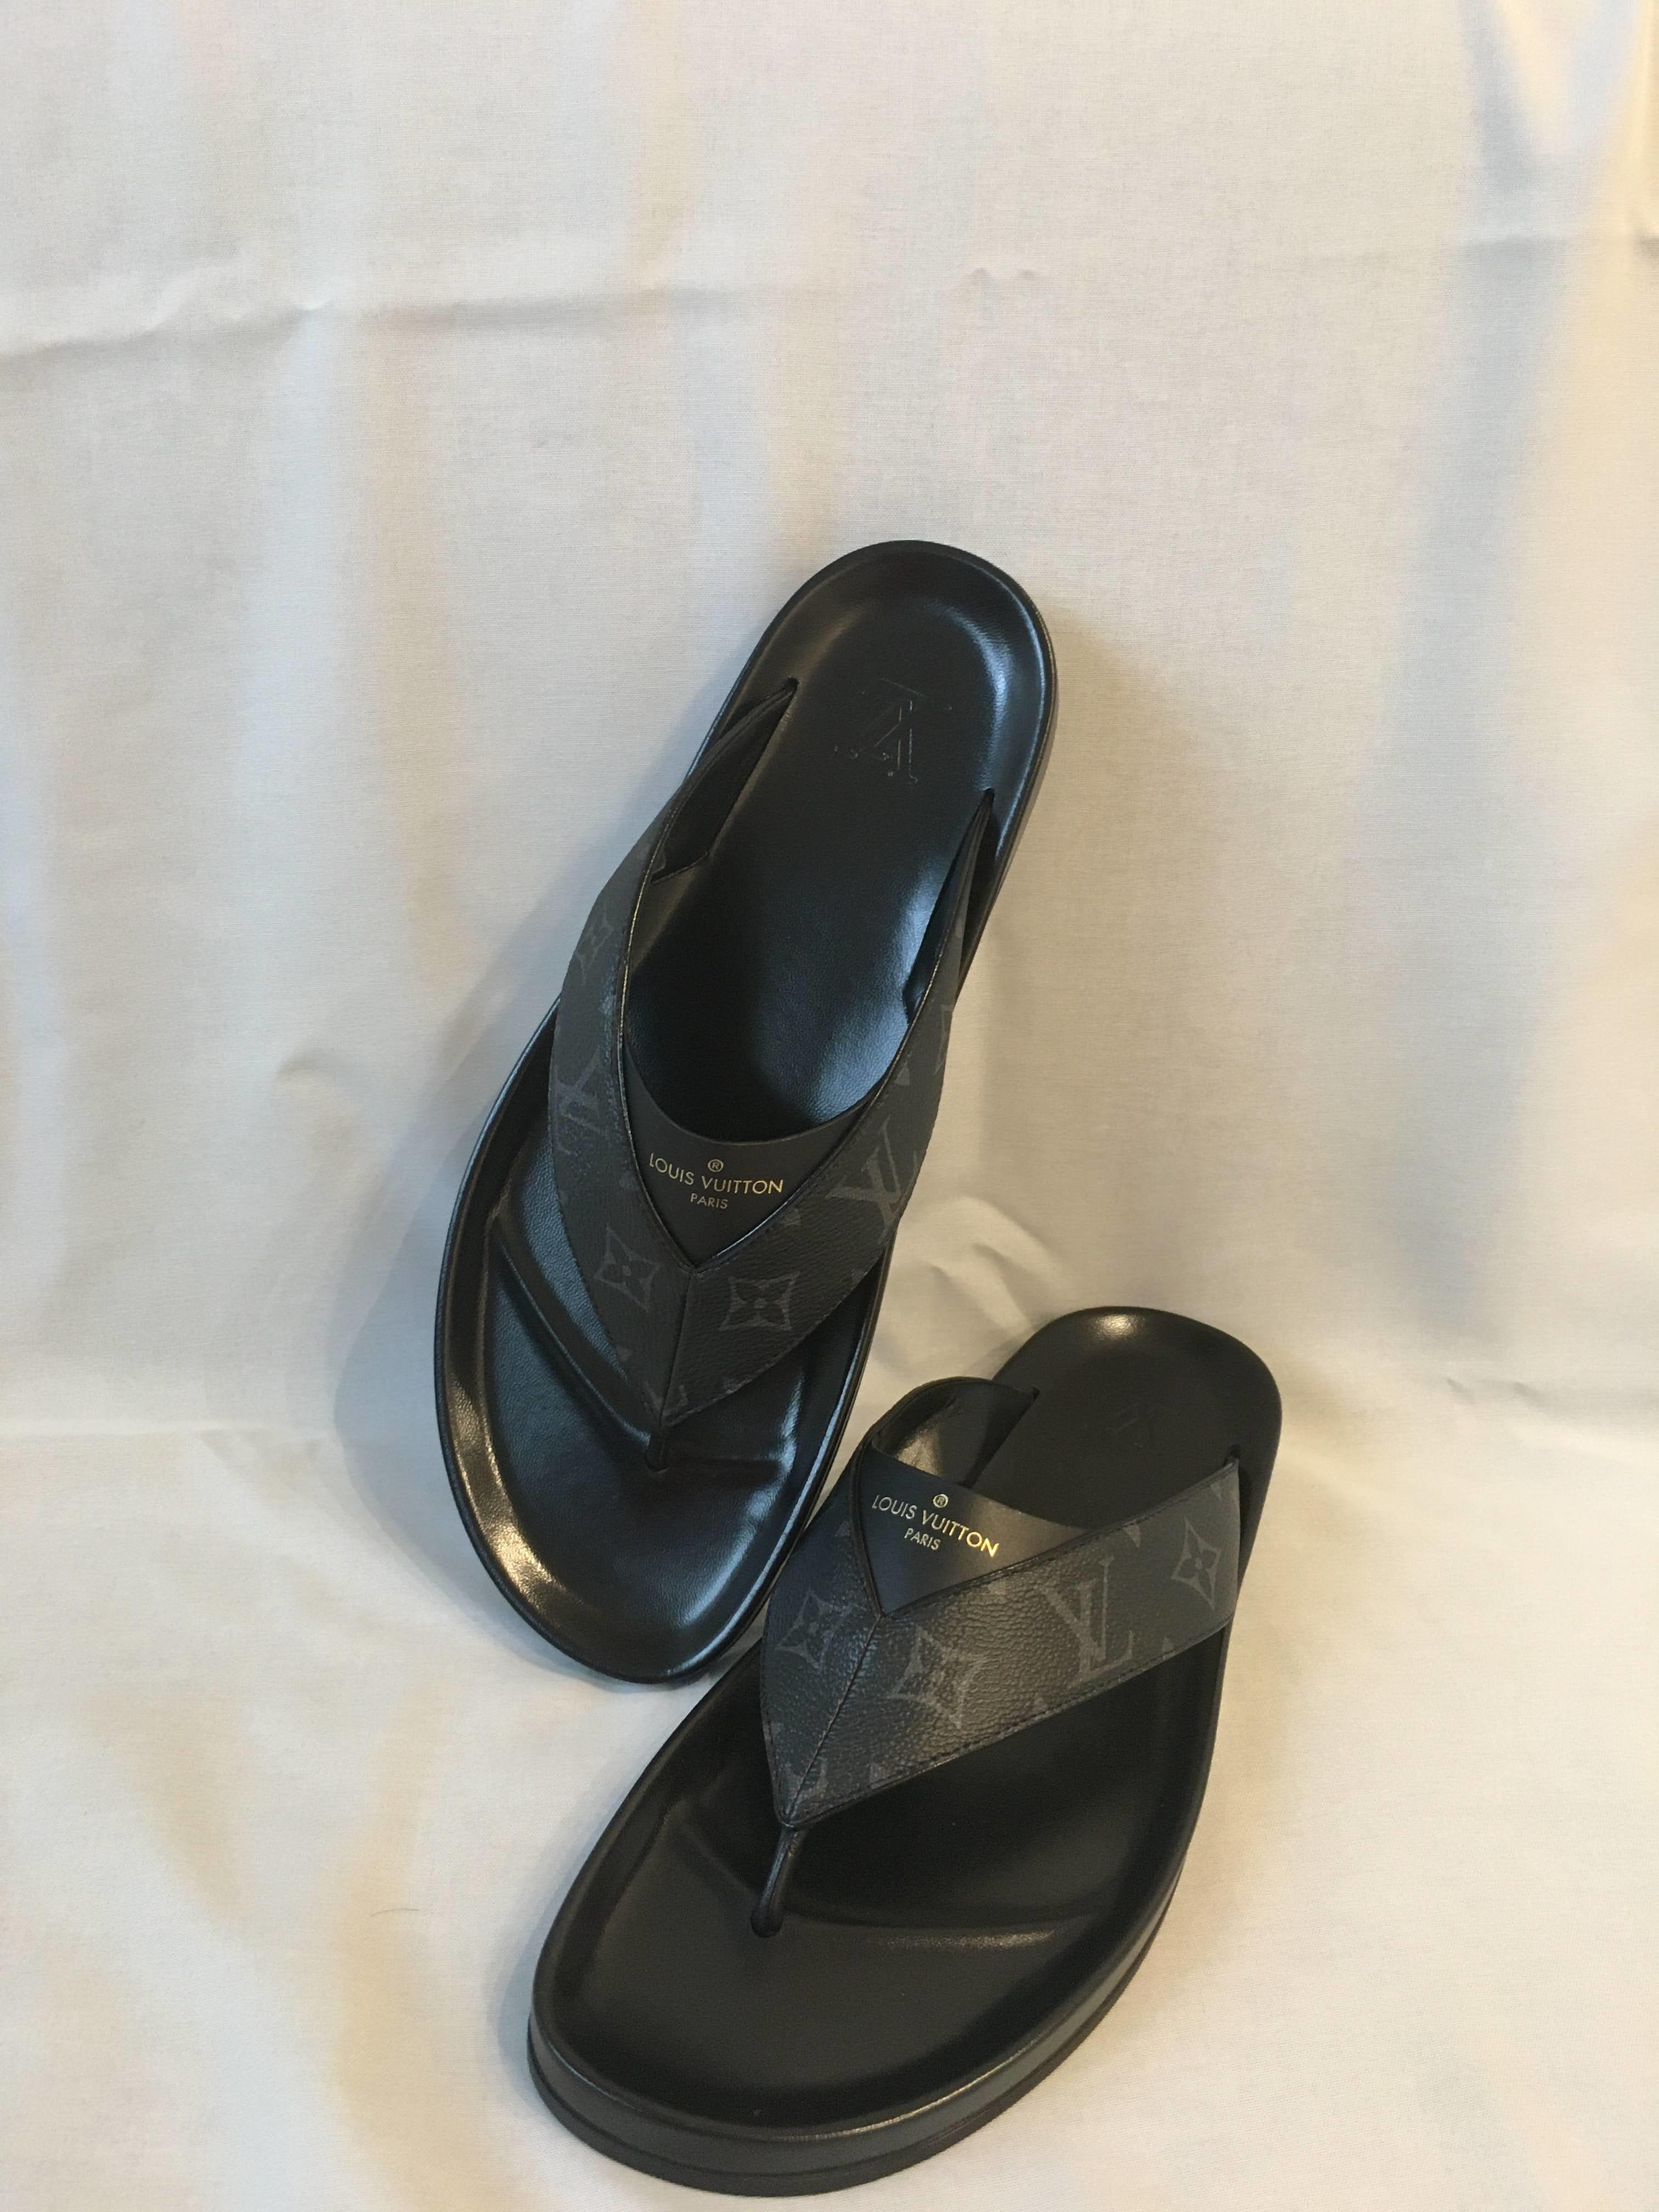 Louis Vuitton Mirabeau Thong Sandals In Brown And Black - Praise To Heaven